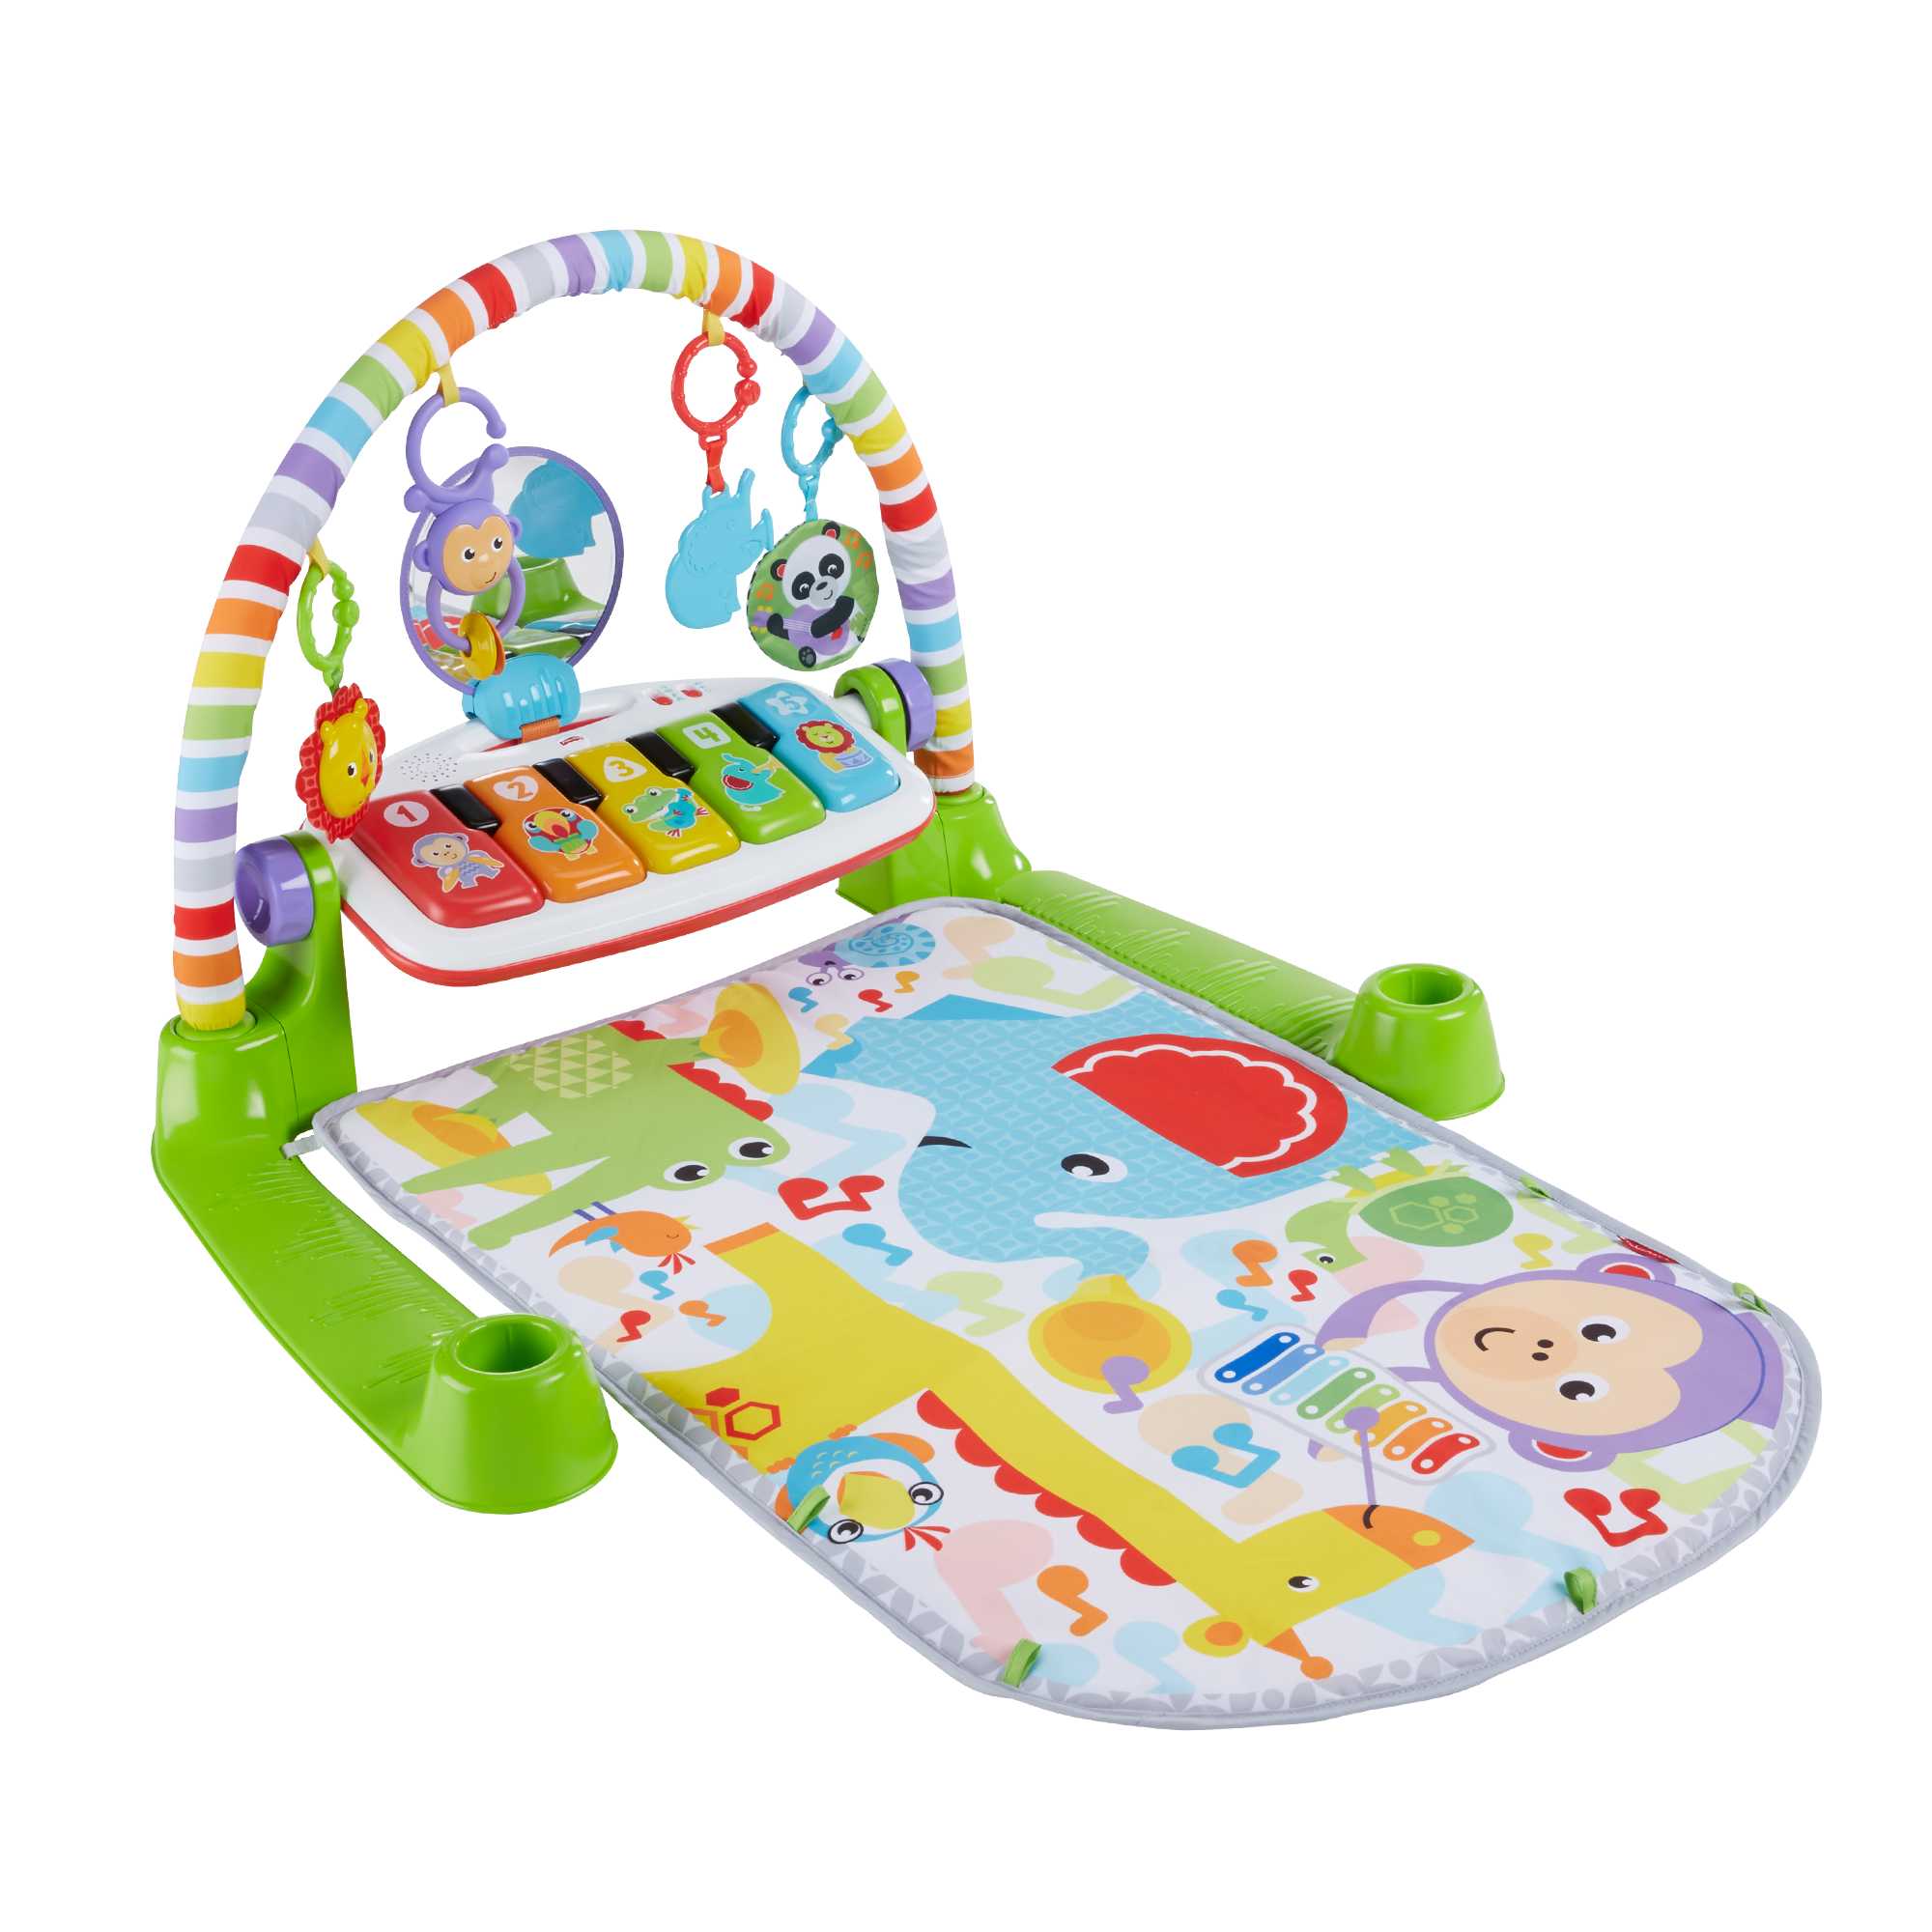 Fisher-Price Deluxe Kick & Play Piano Gym Infant Playmat with Electronic Learning Toy, Green - image 4 of 10